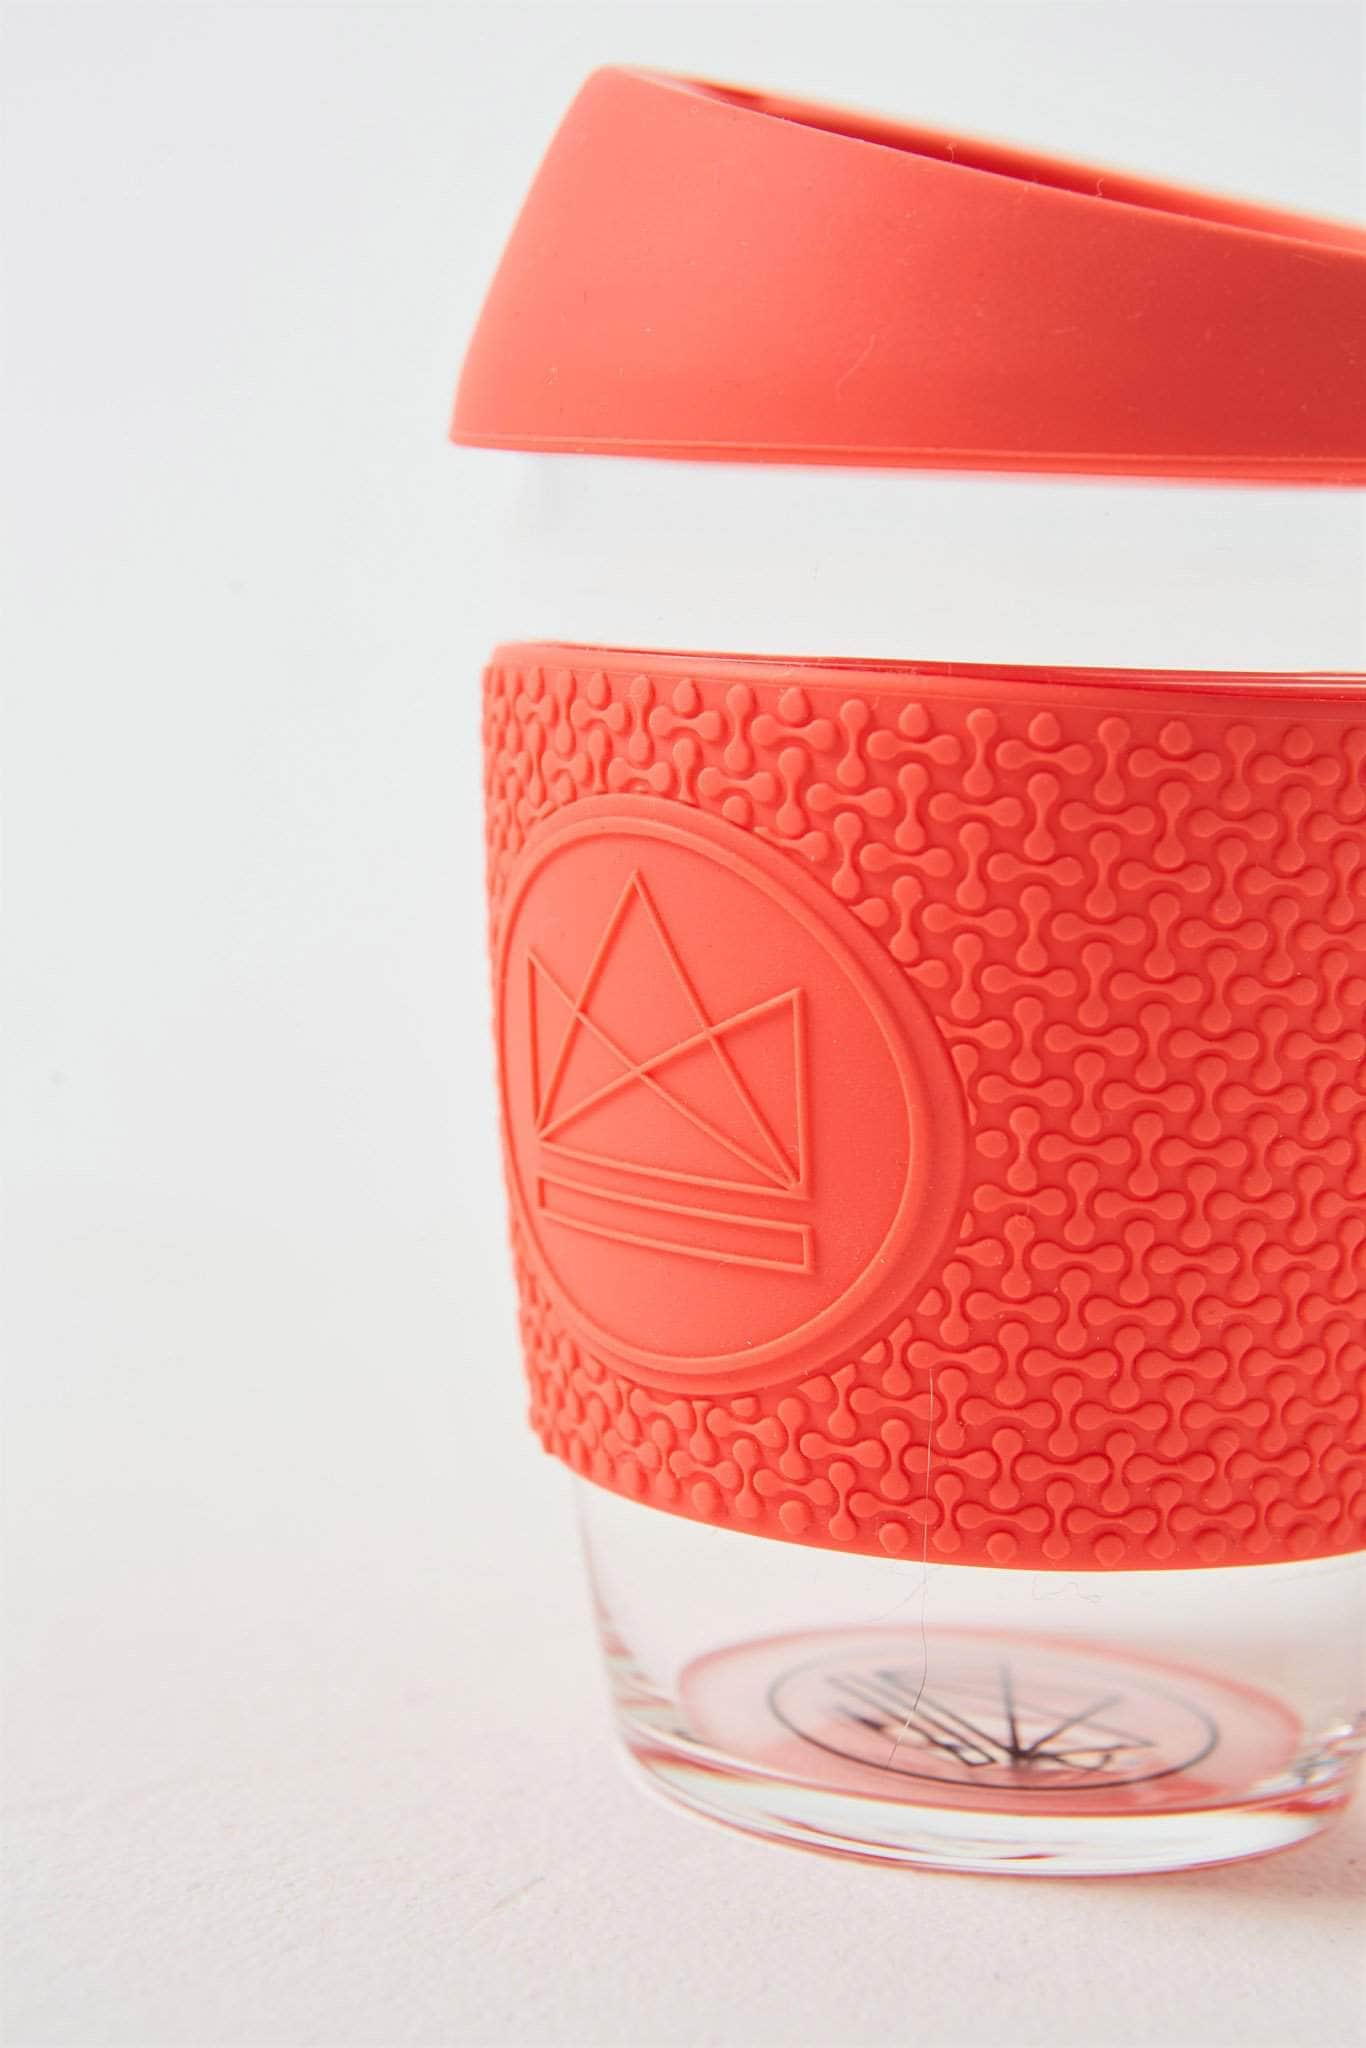 Neon Kactus Coffee Cup Neon Kactus - Glass Coffee Cups - 12oz - Dream Believer Red/Coral